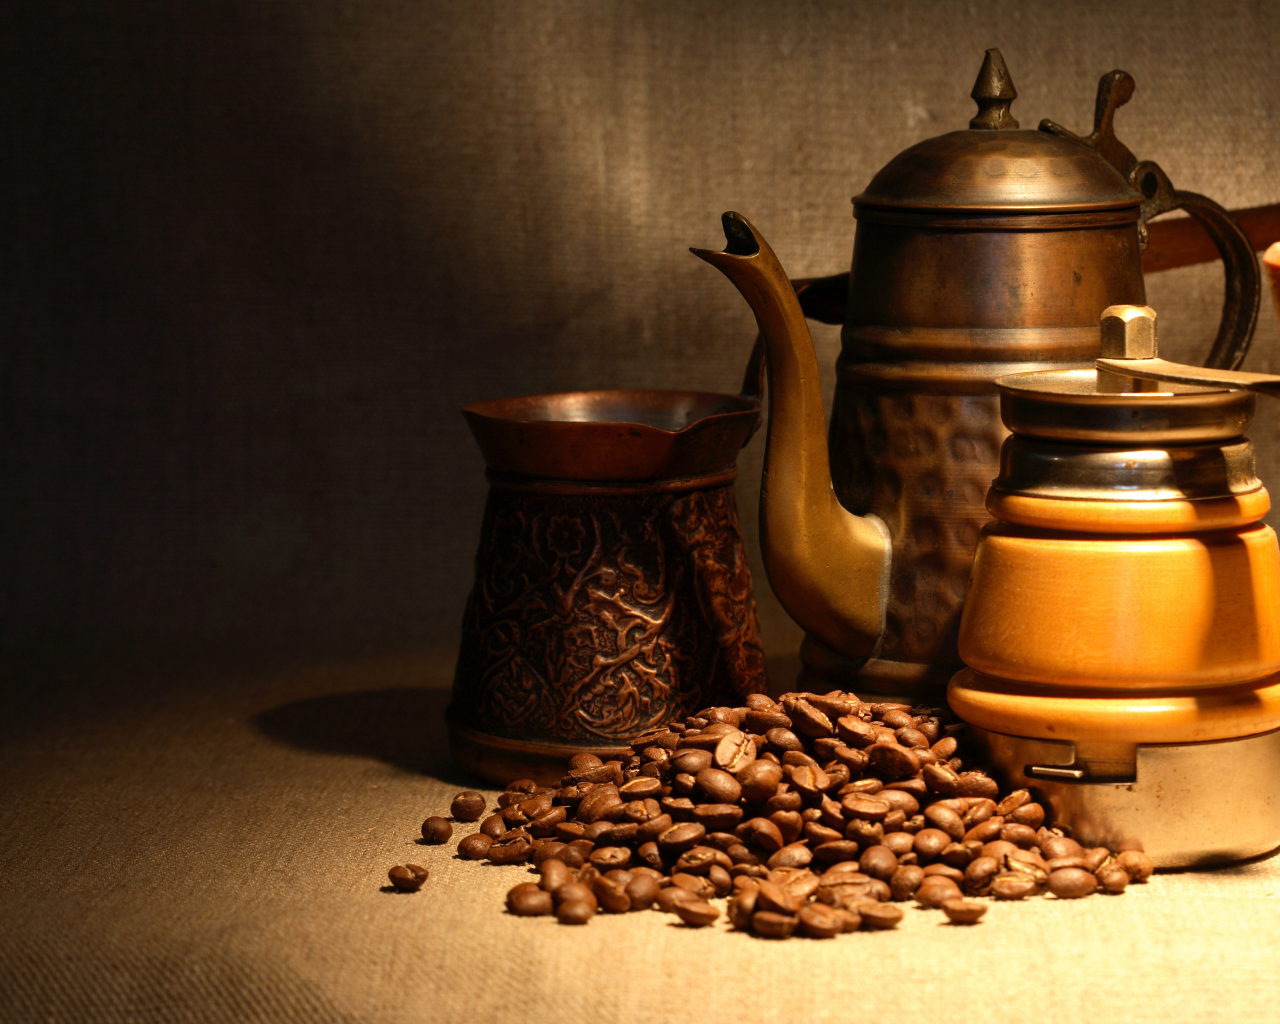 Coffee grinder, Turk, kettle and coffee beans on the table